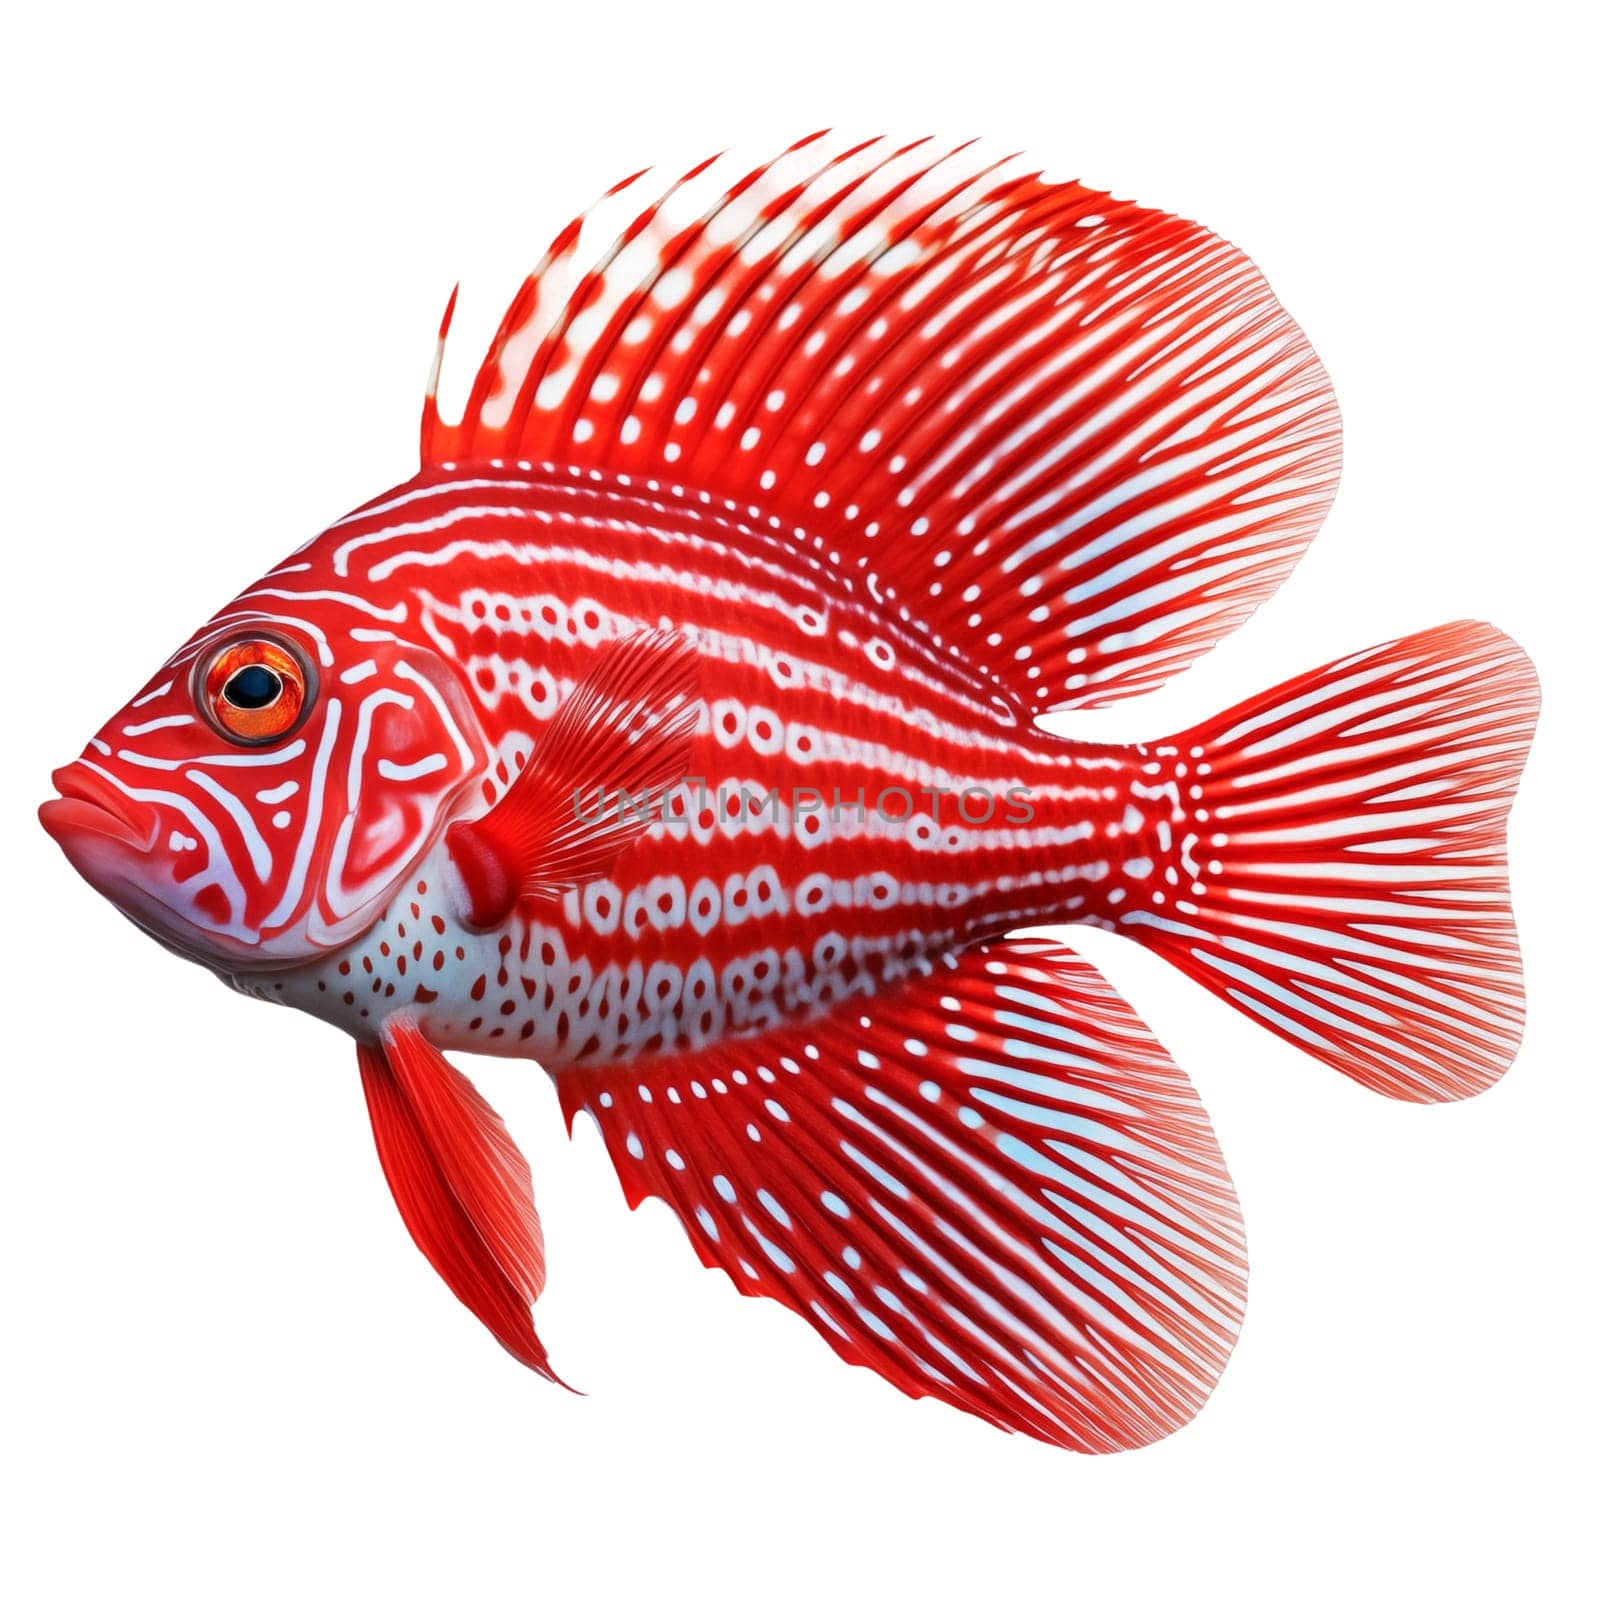 Multicolored aquarium fish on a transparent background, side view. The Red Stargazer, an red and white saltwater aquarium fish, isolated on a white background, a design element for insertion.